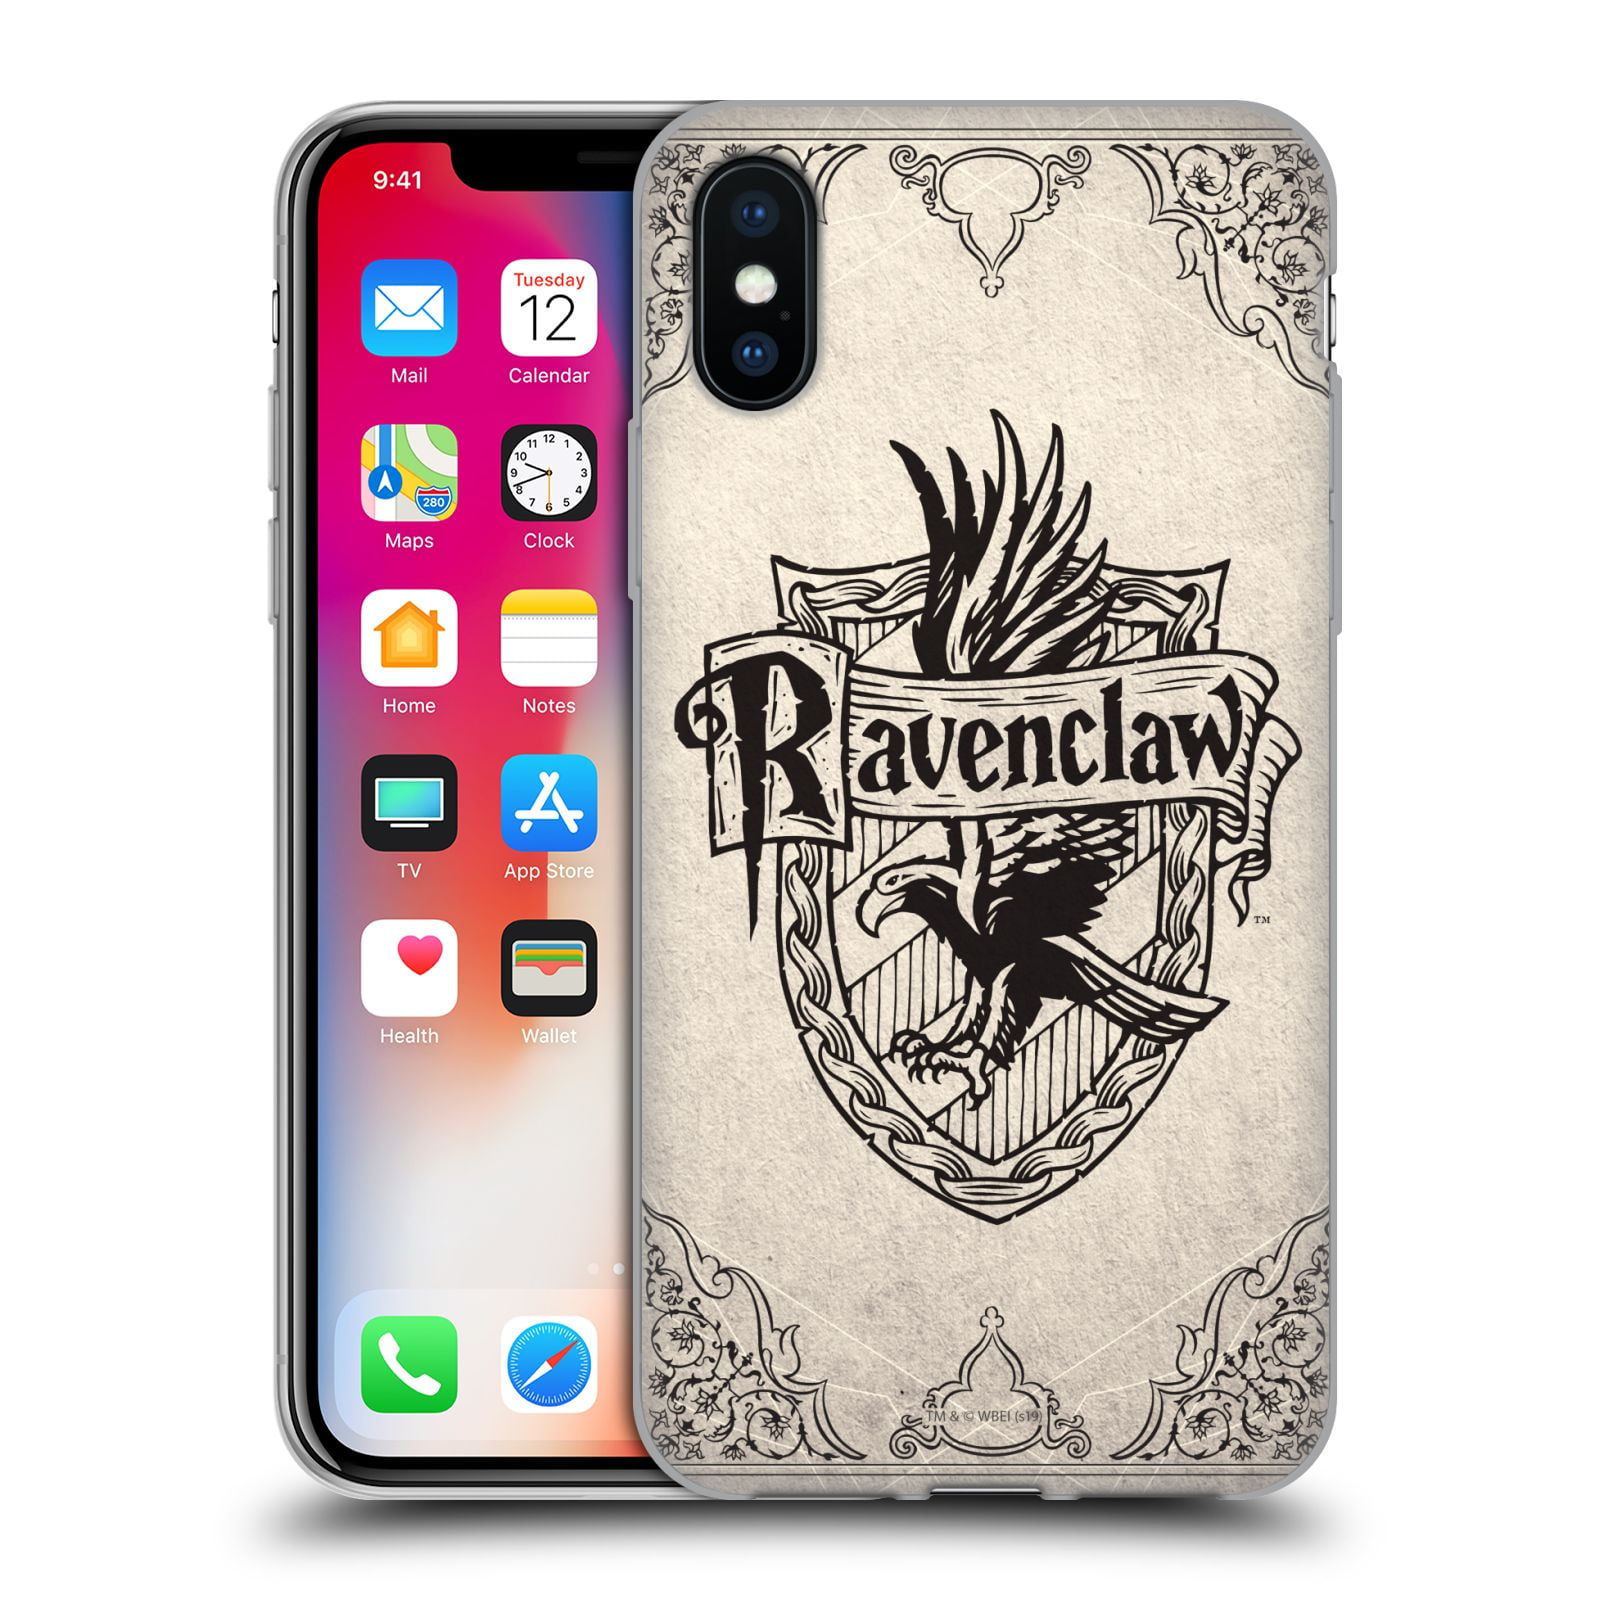 Custom Flexible Phone Carcasas for iPod Touch 6 Generation 6th Carcasa Cover Harry?Potter